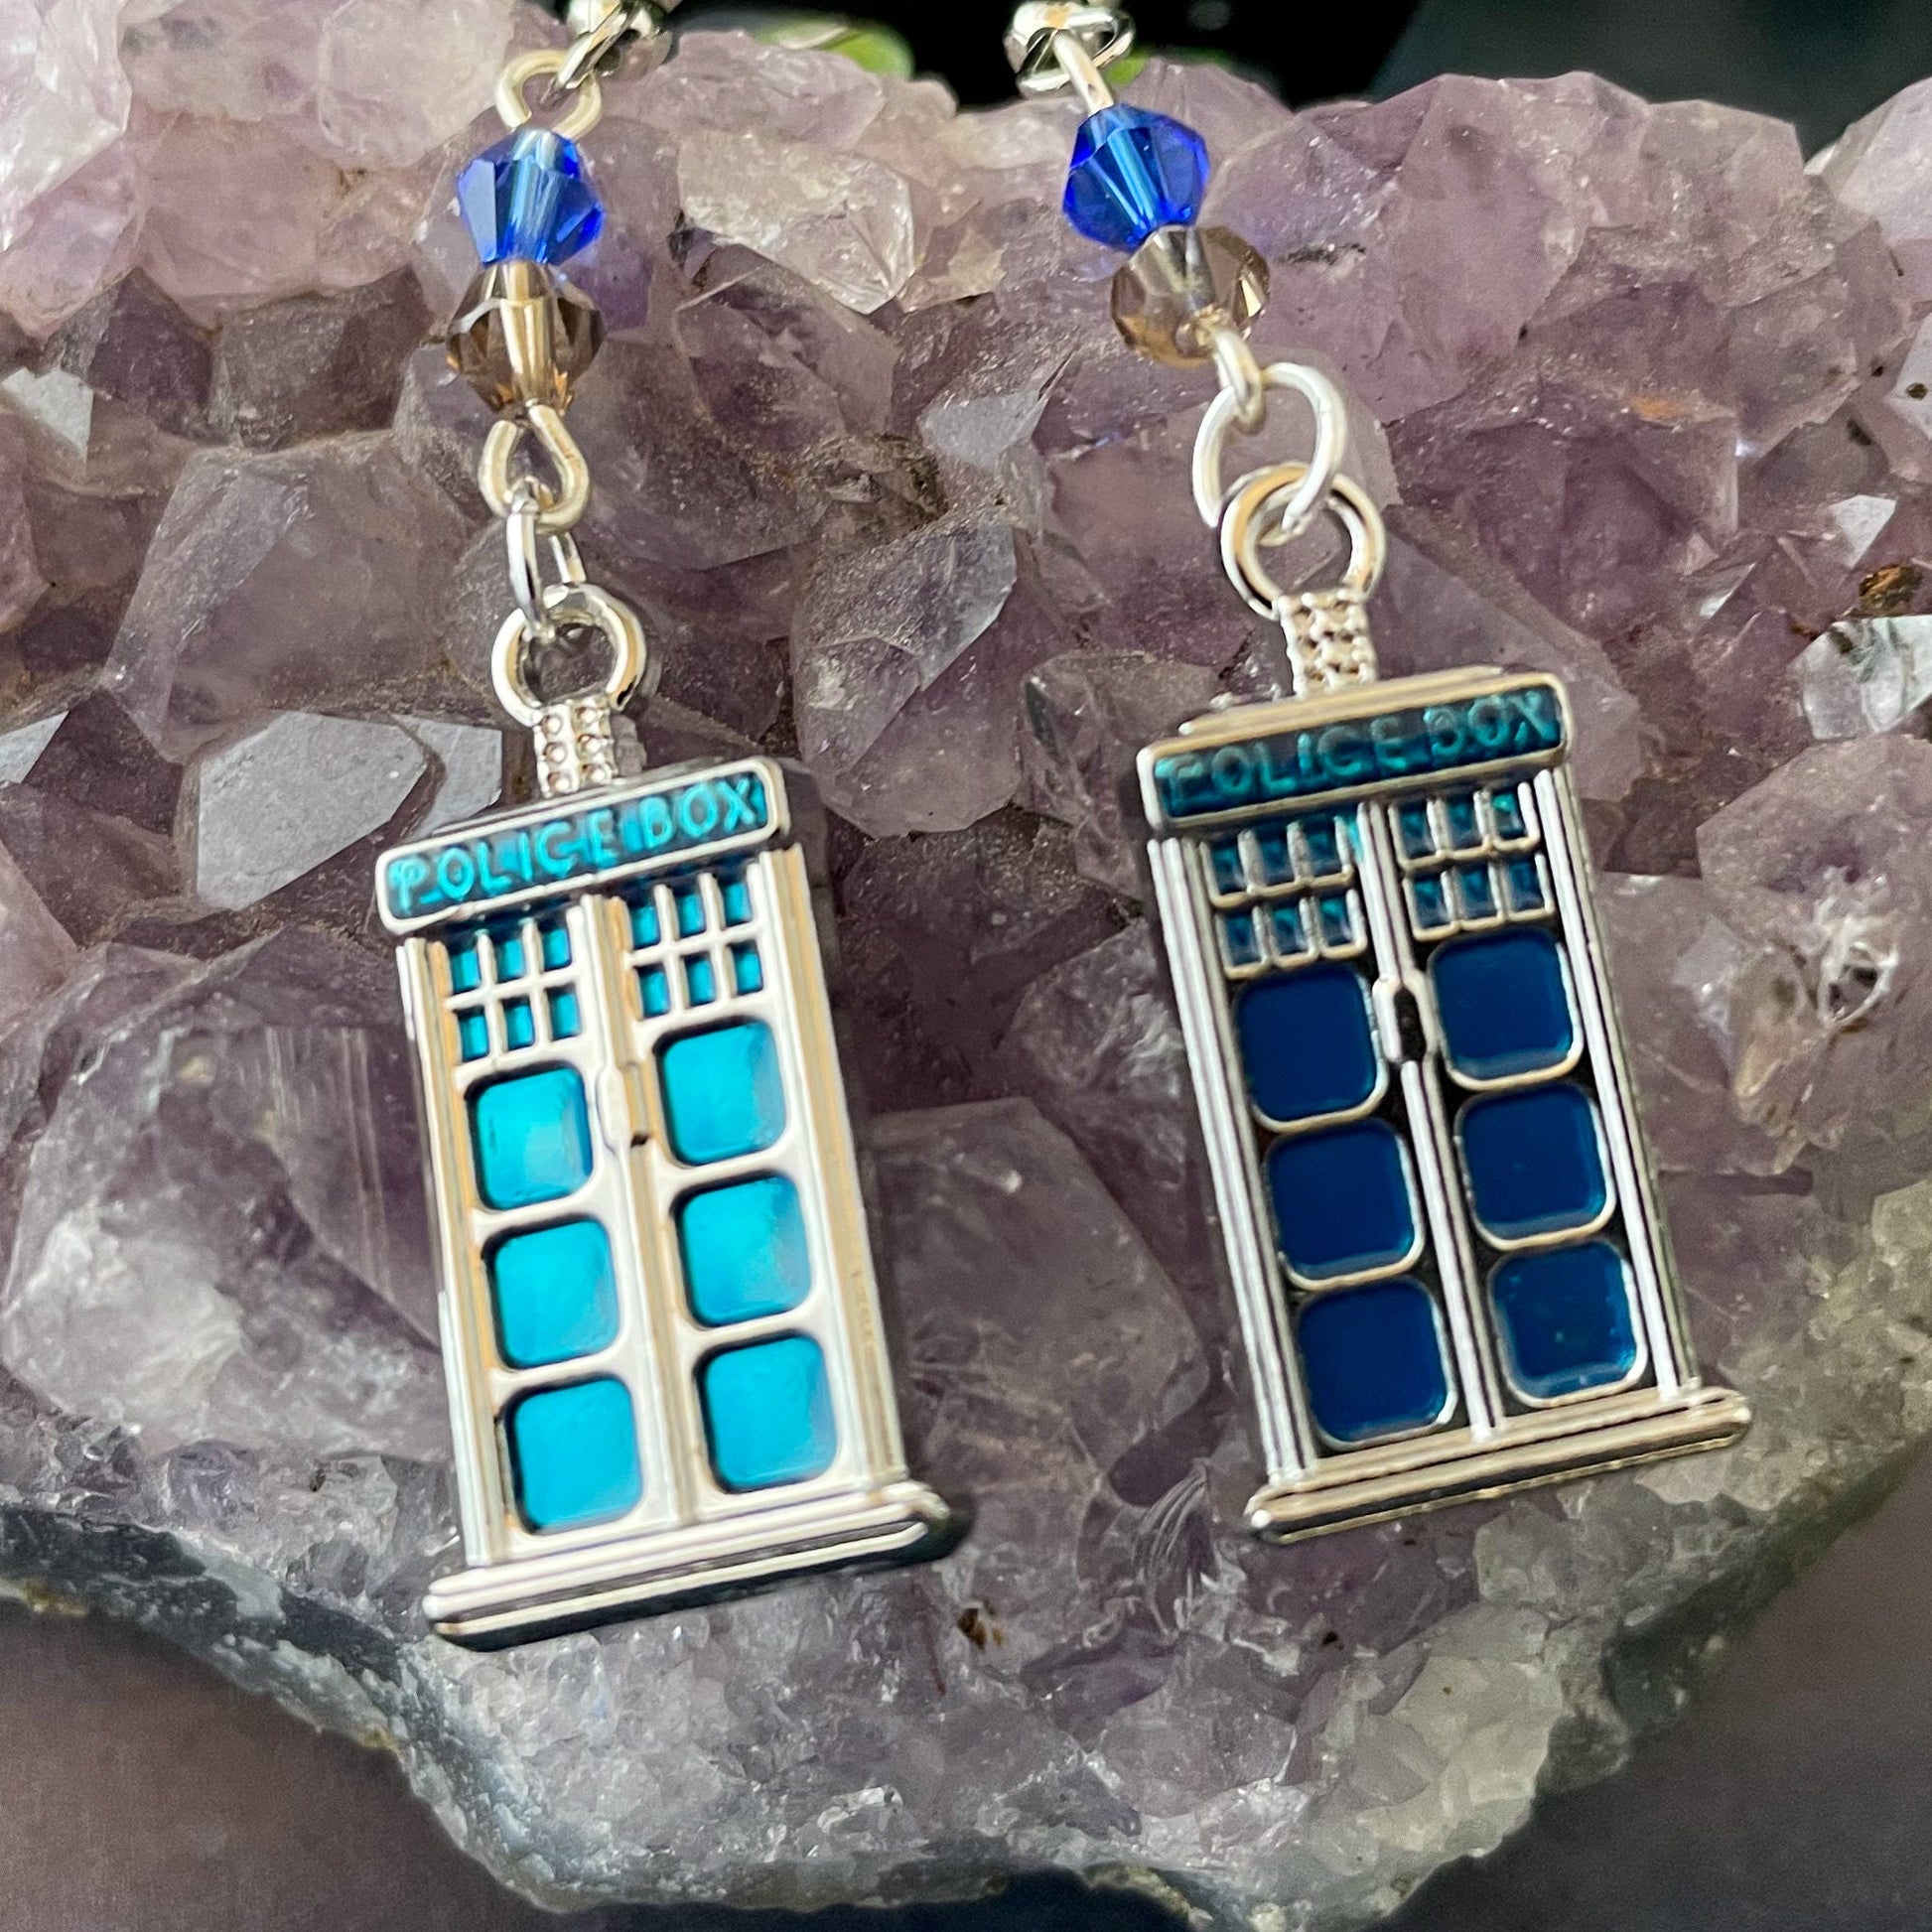 Doctor Who Police Box Enamel and Bead Earrings - Smoke and Blue